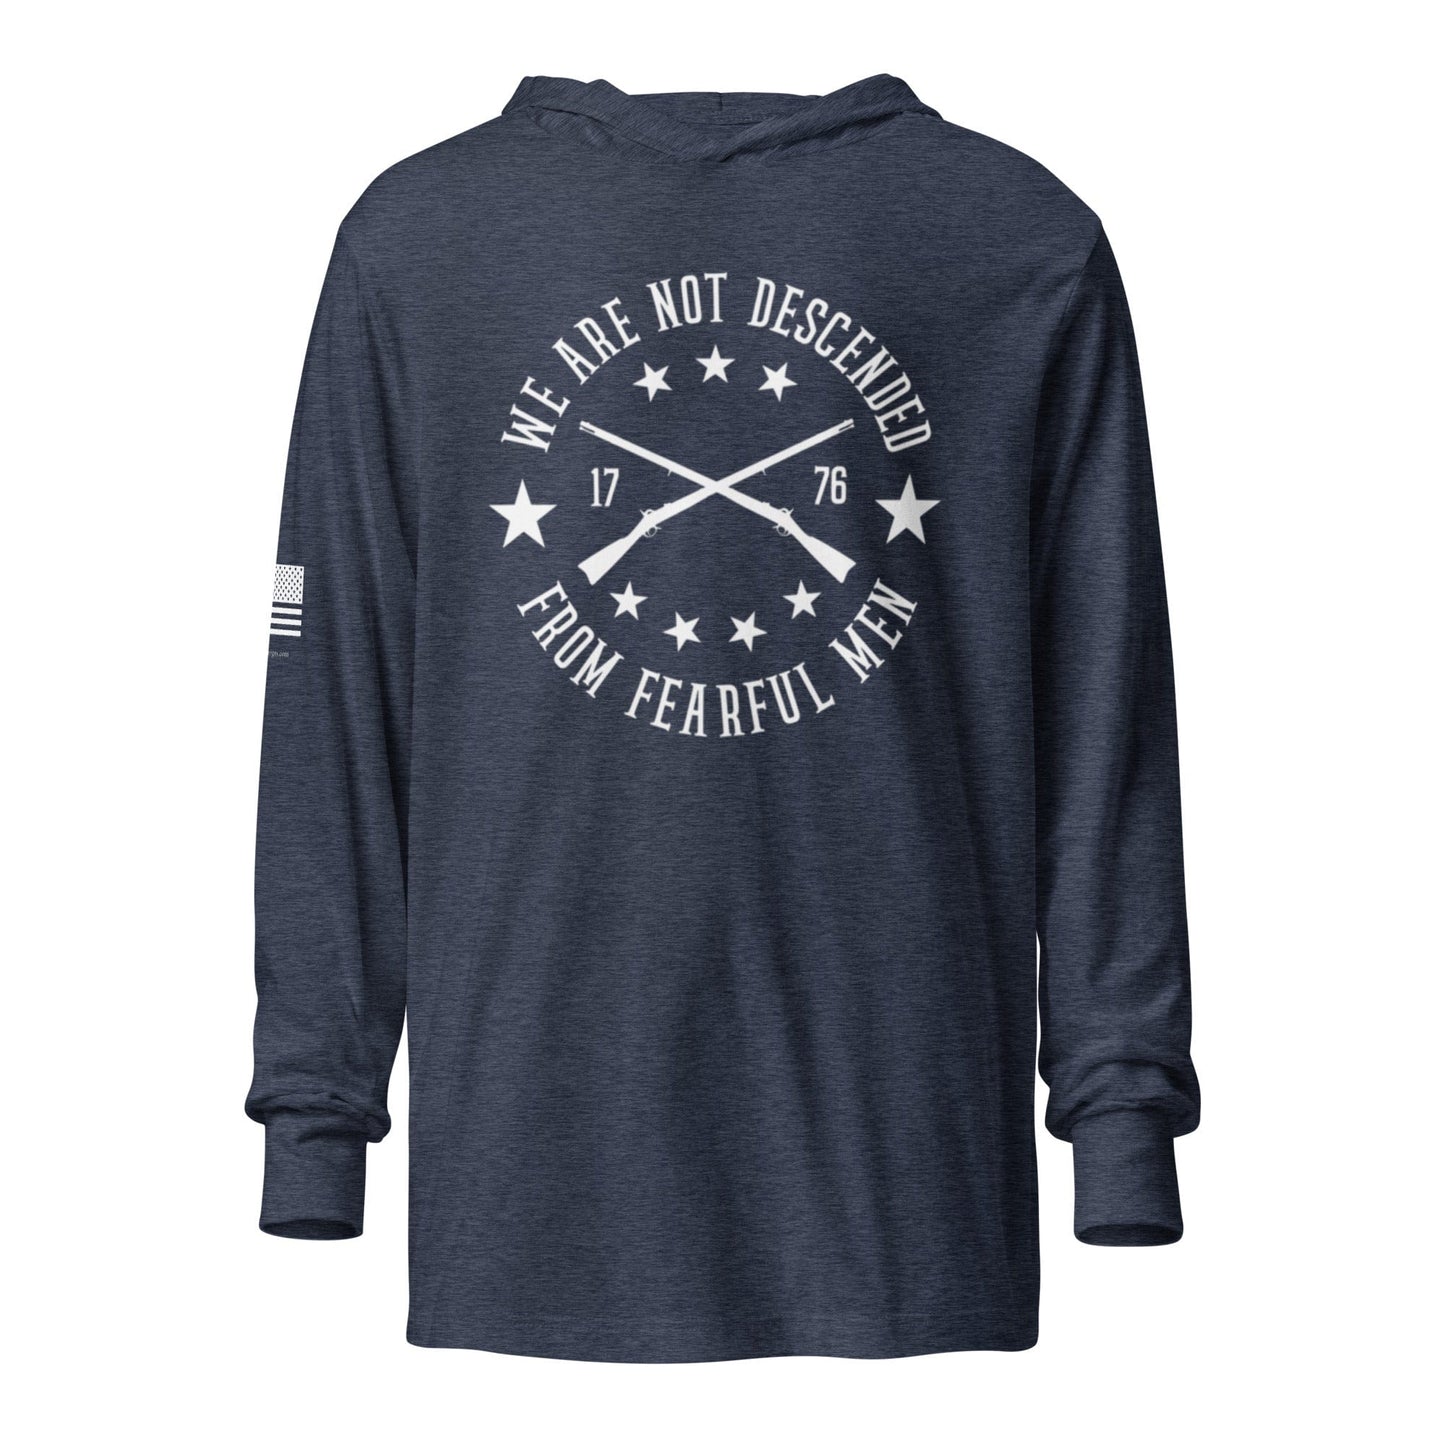 FreedomKat Designs, LLC Heather Navy / XS We Are Not Descended Hooded long-sleeve tee